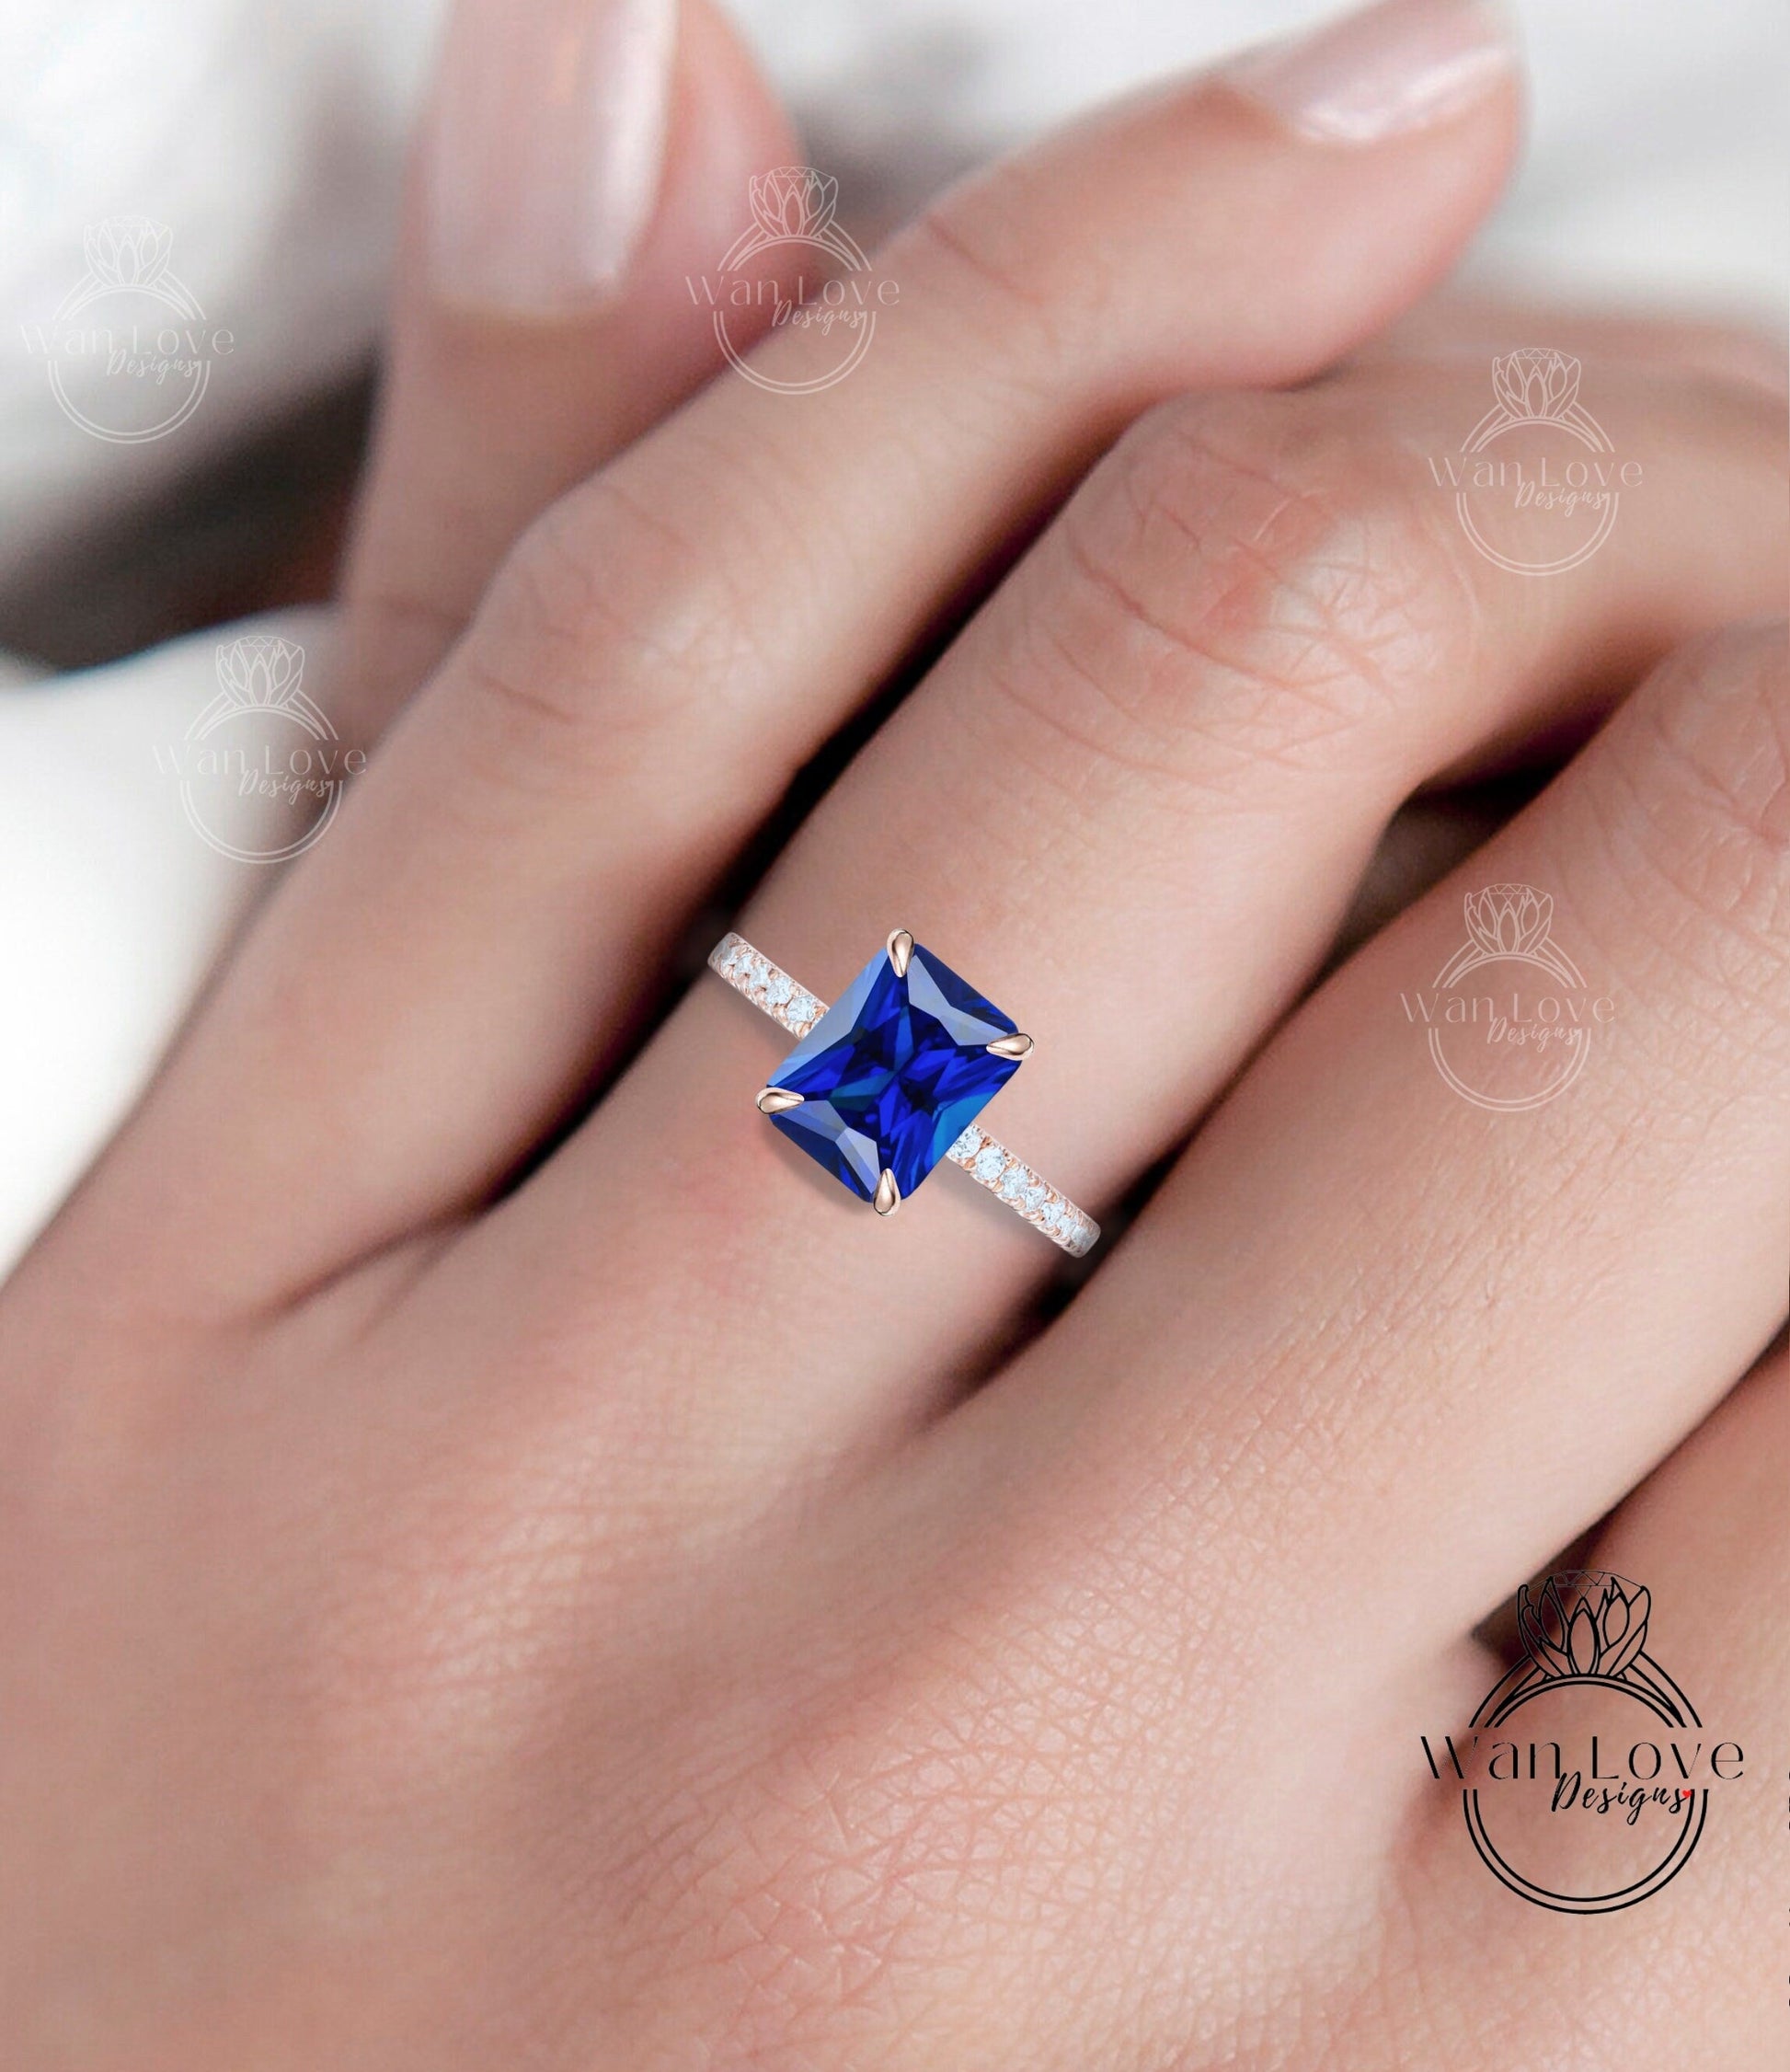 Blue Sapphire engagement ring vintage ring emerald sapphire rose gold ring solitaire art deco ring bridal wedding ring Anniversary ring gift Wan Love Designs